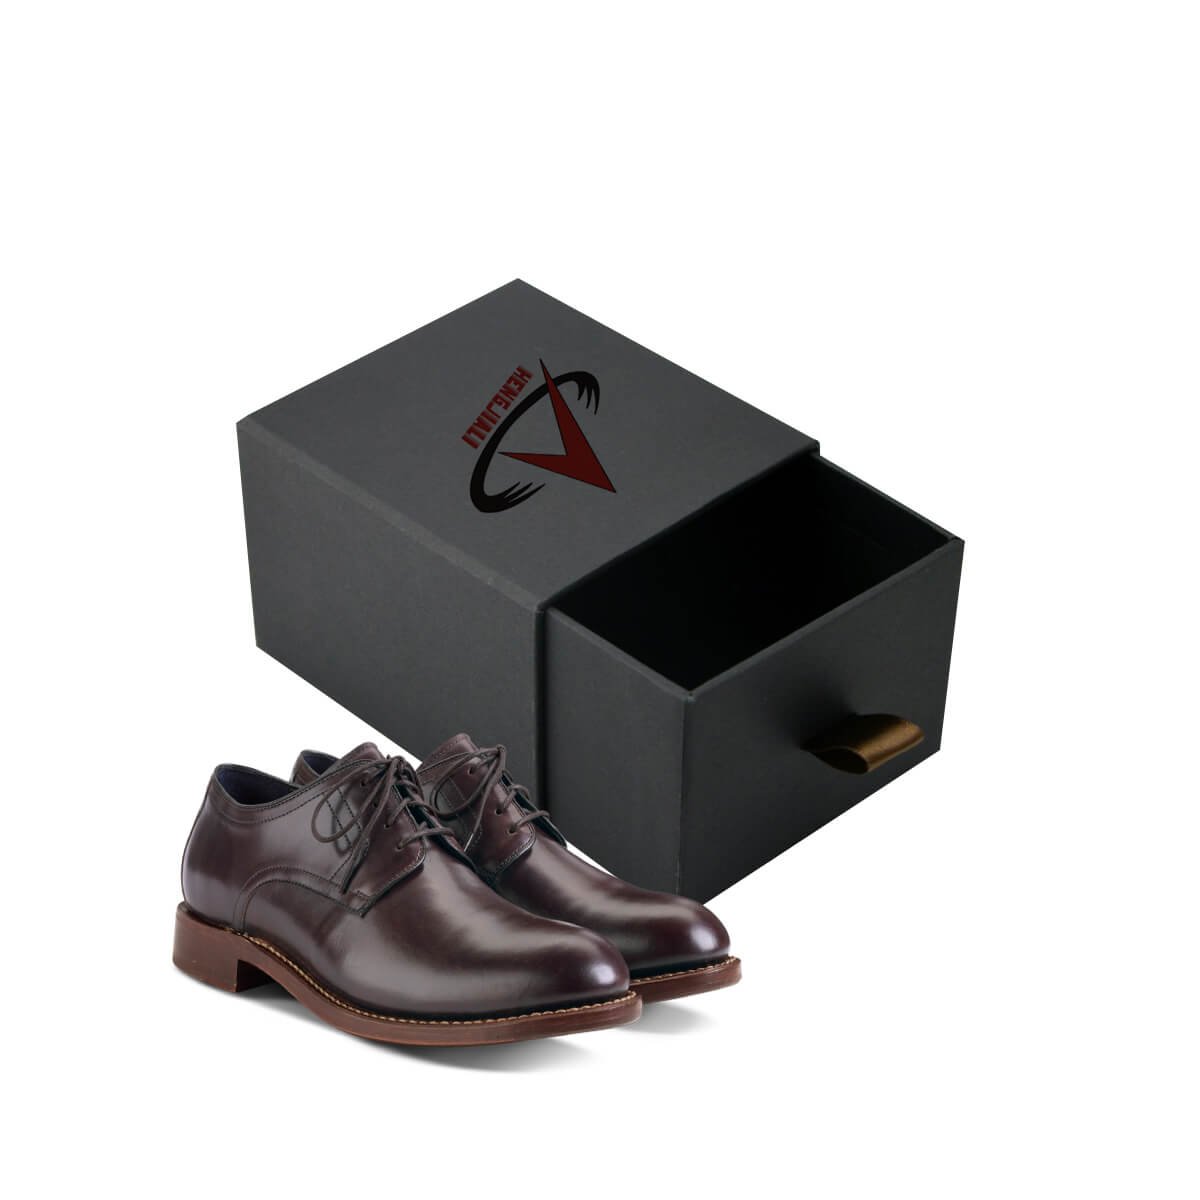 Custom Shoe Boxes - Order Now With Free Shipping